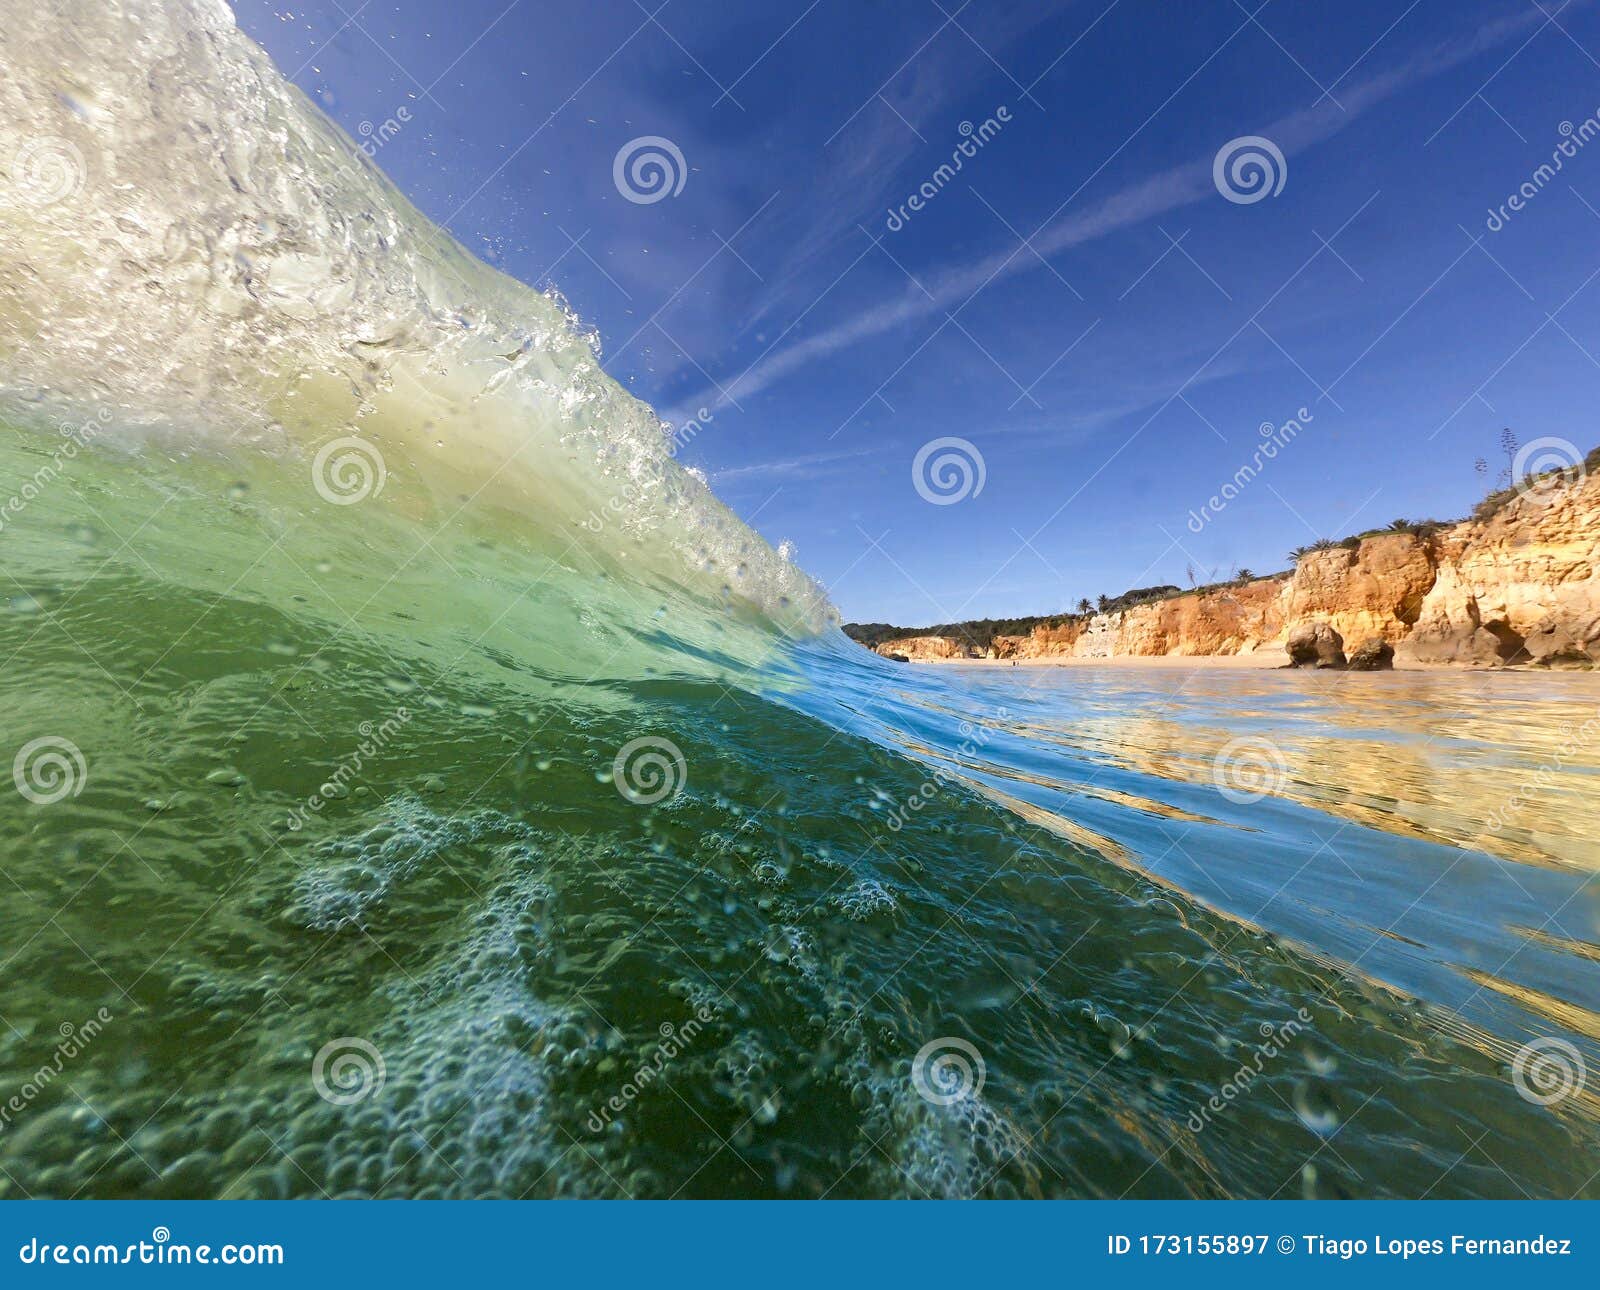 view of a waver breaking at the beautiful alemao beach in portimao, algarve